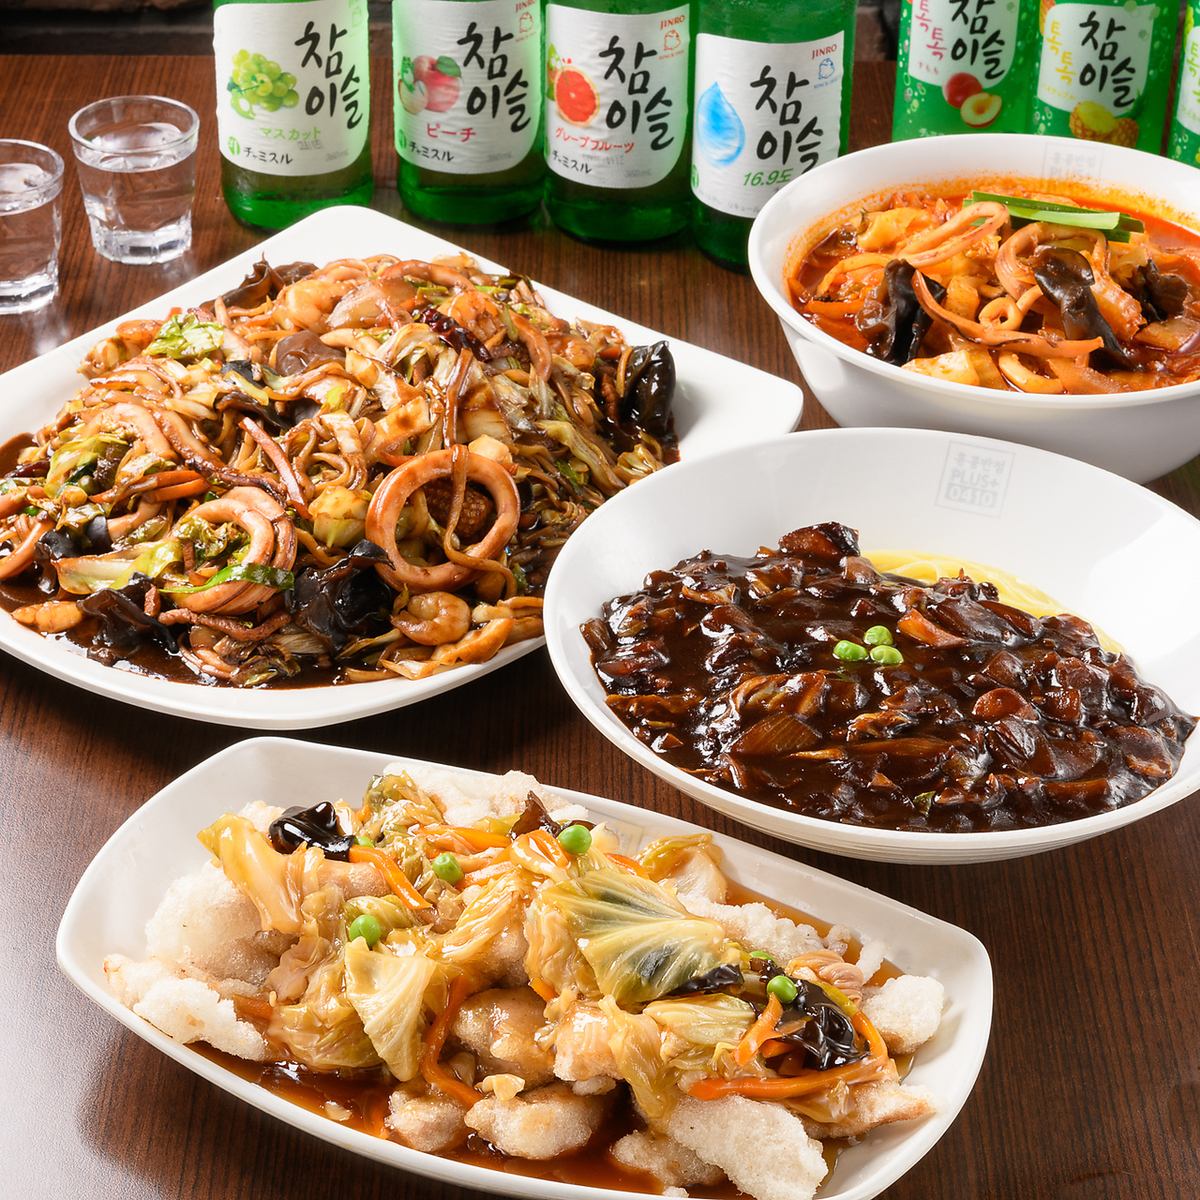 It is a Korean-style Chinese restaurant where you can enjoy the taste that is very popular in Korea.